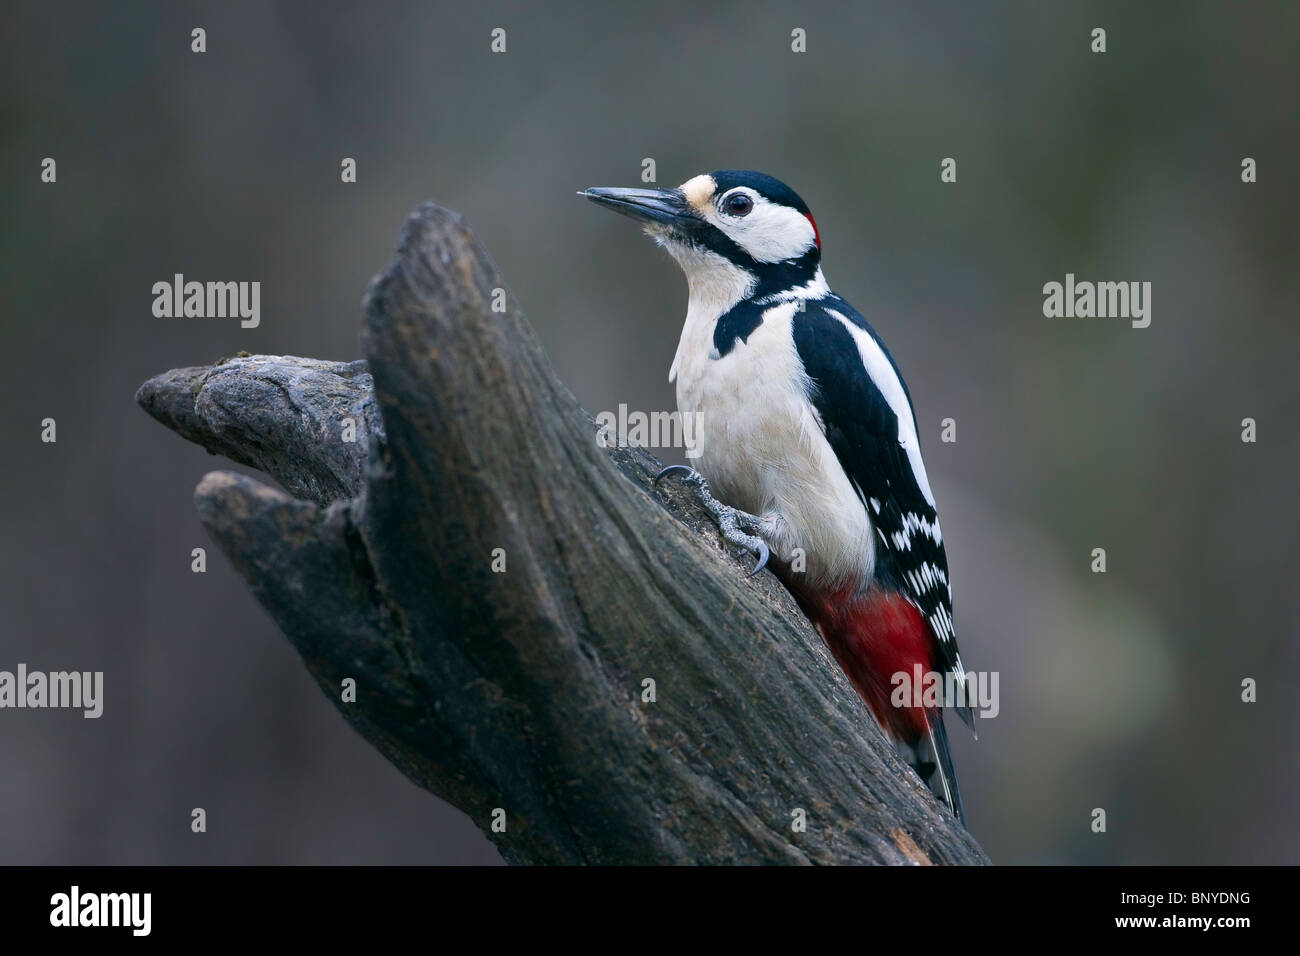 A Great Spotted Woodpecker perches on an old tree stump Stock Photo